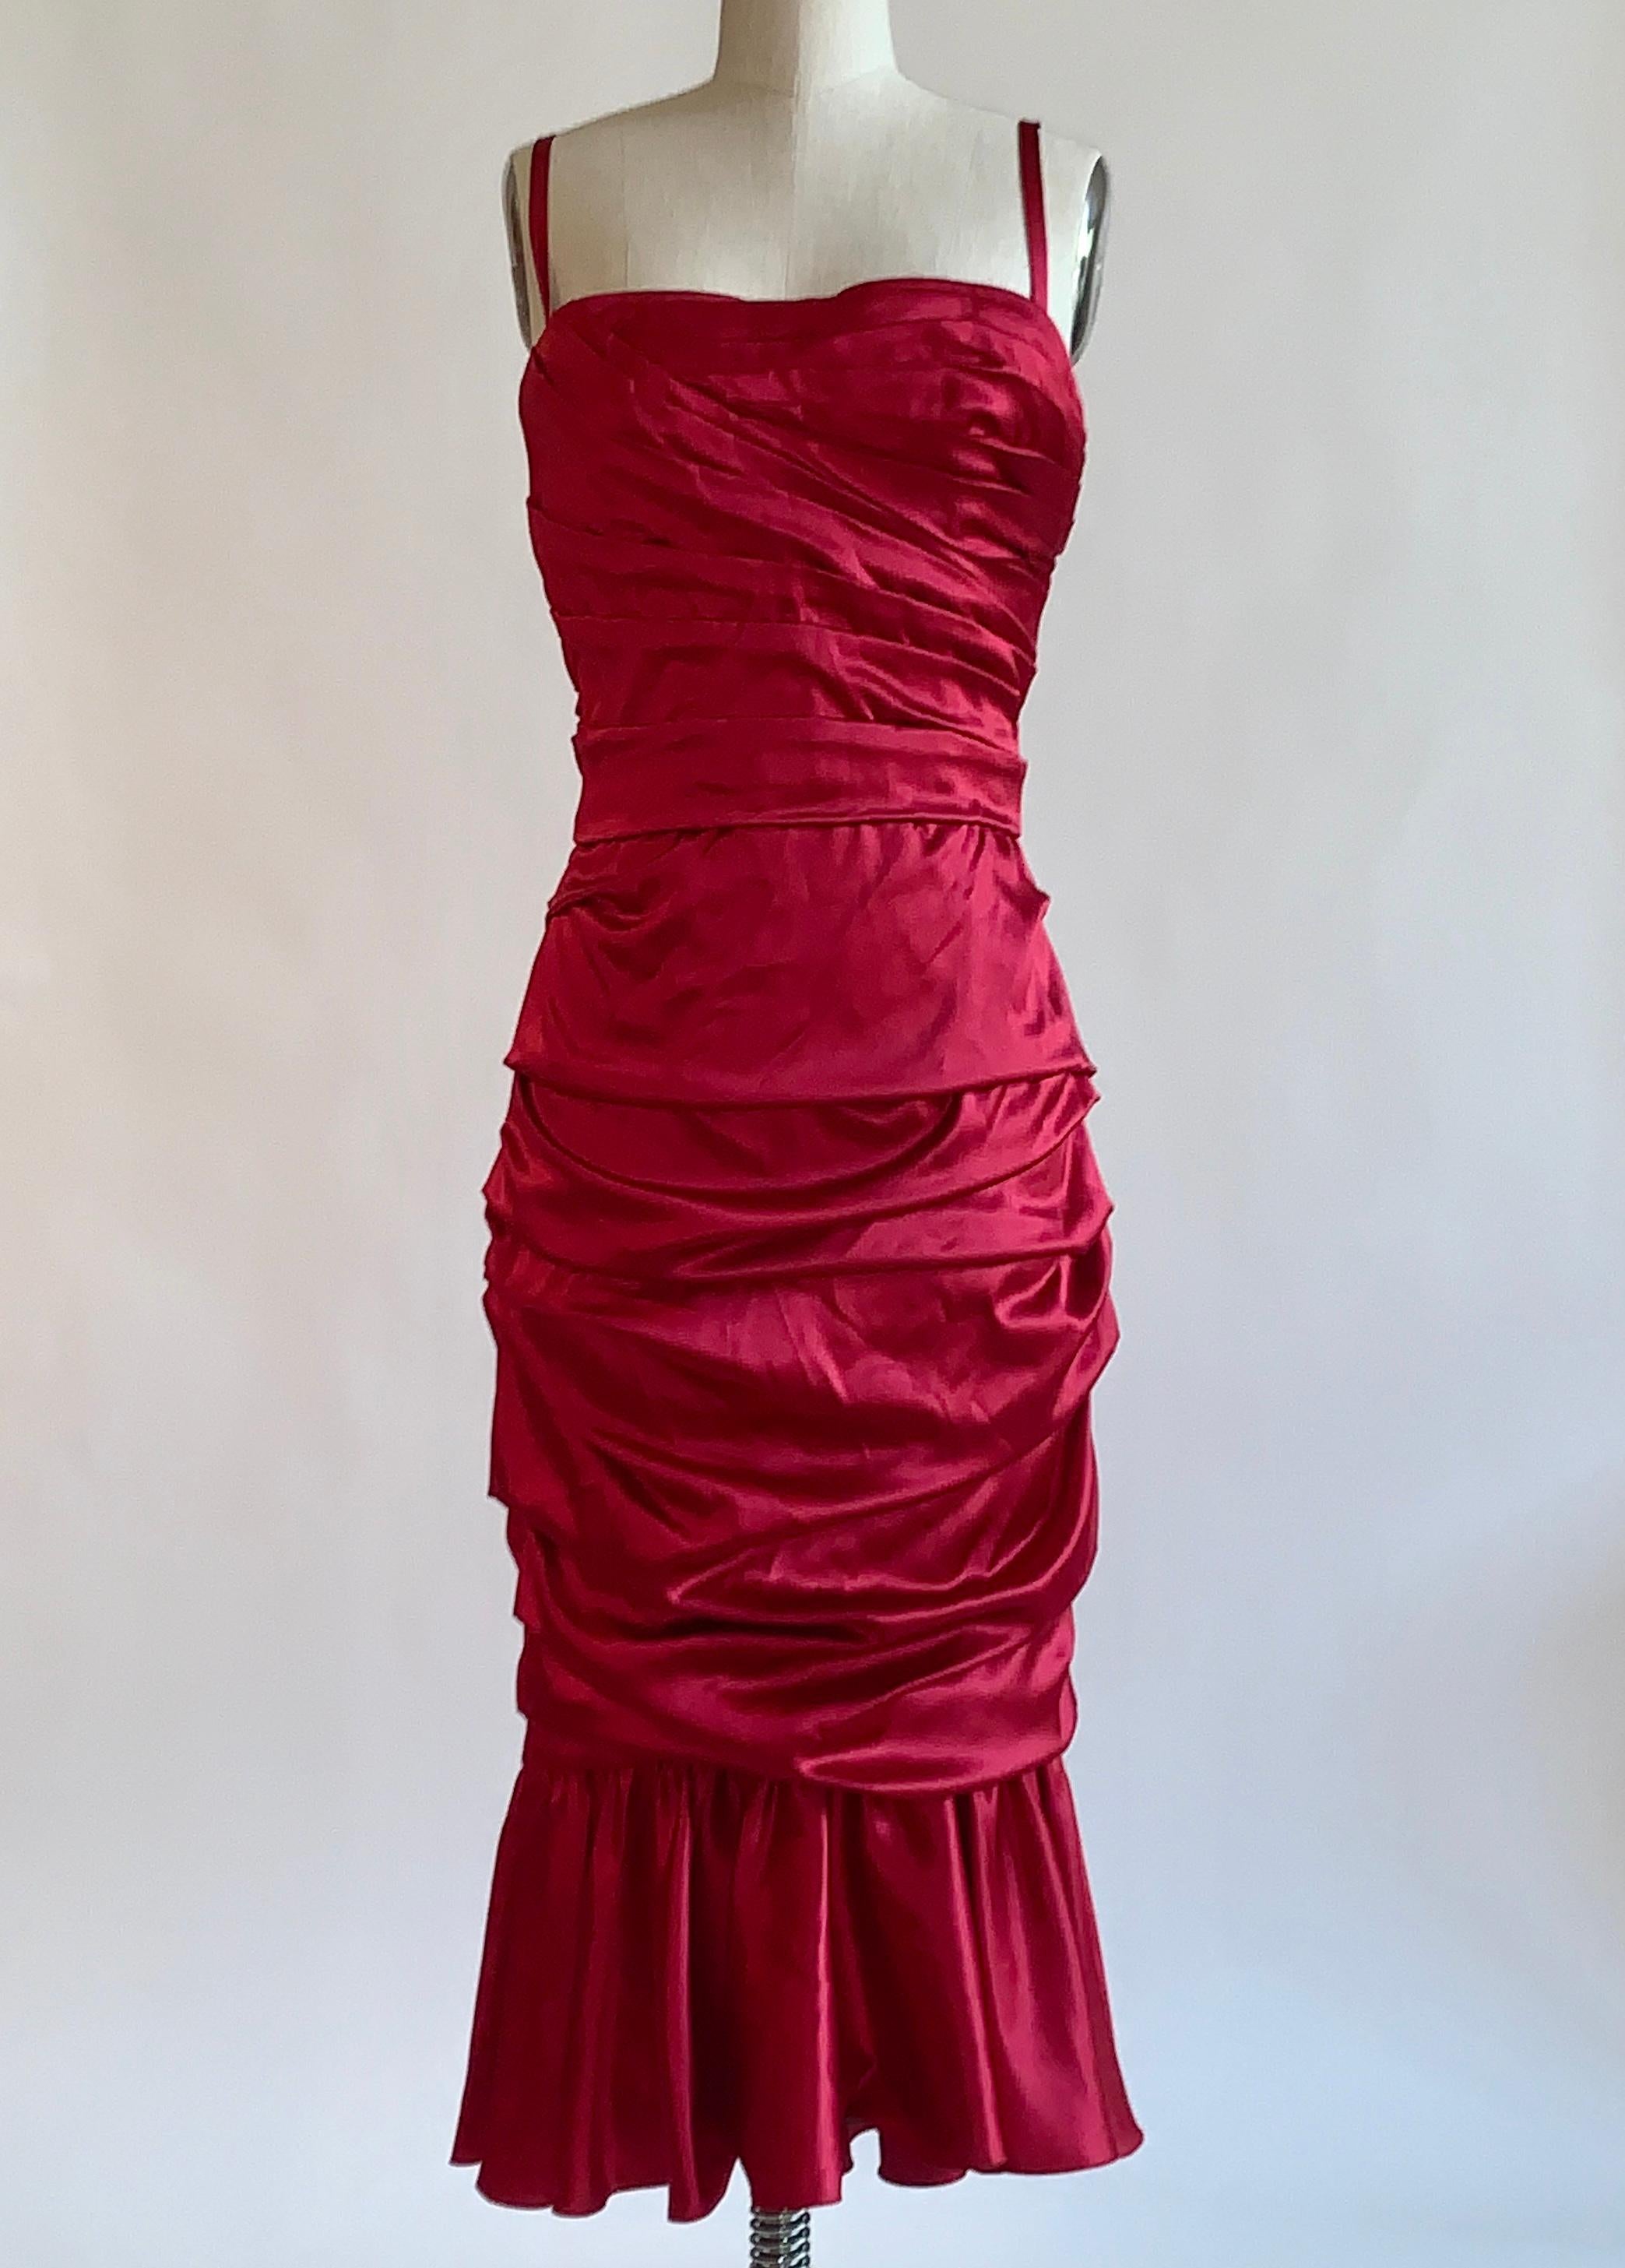 Dolce & Gabbana red ruched silk satin cocktail dress with thin straps and ruffled flounce hem. Built in corset at top. Back zip. 

96% silk, 4% spandex.
Fully lined in 66% silk, 15% cotton, 11% spandex, 8% polyamide.

Made in Italy.

Labelled size